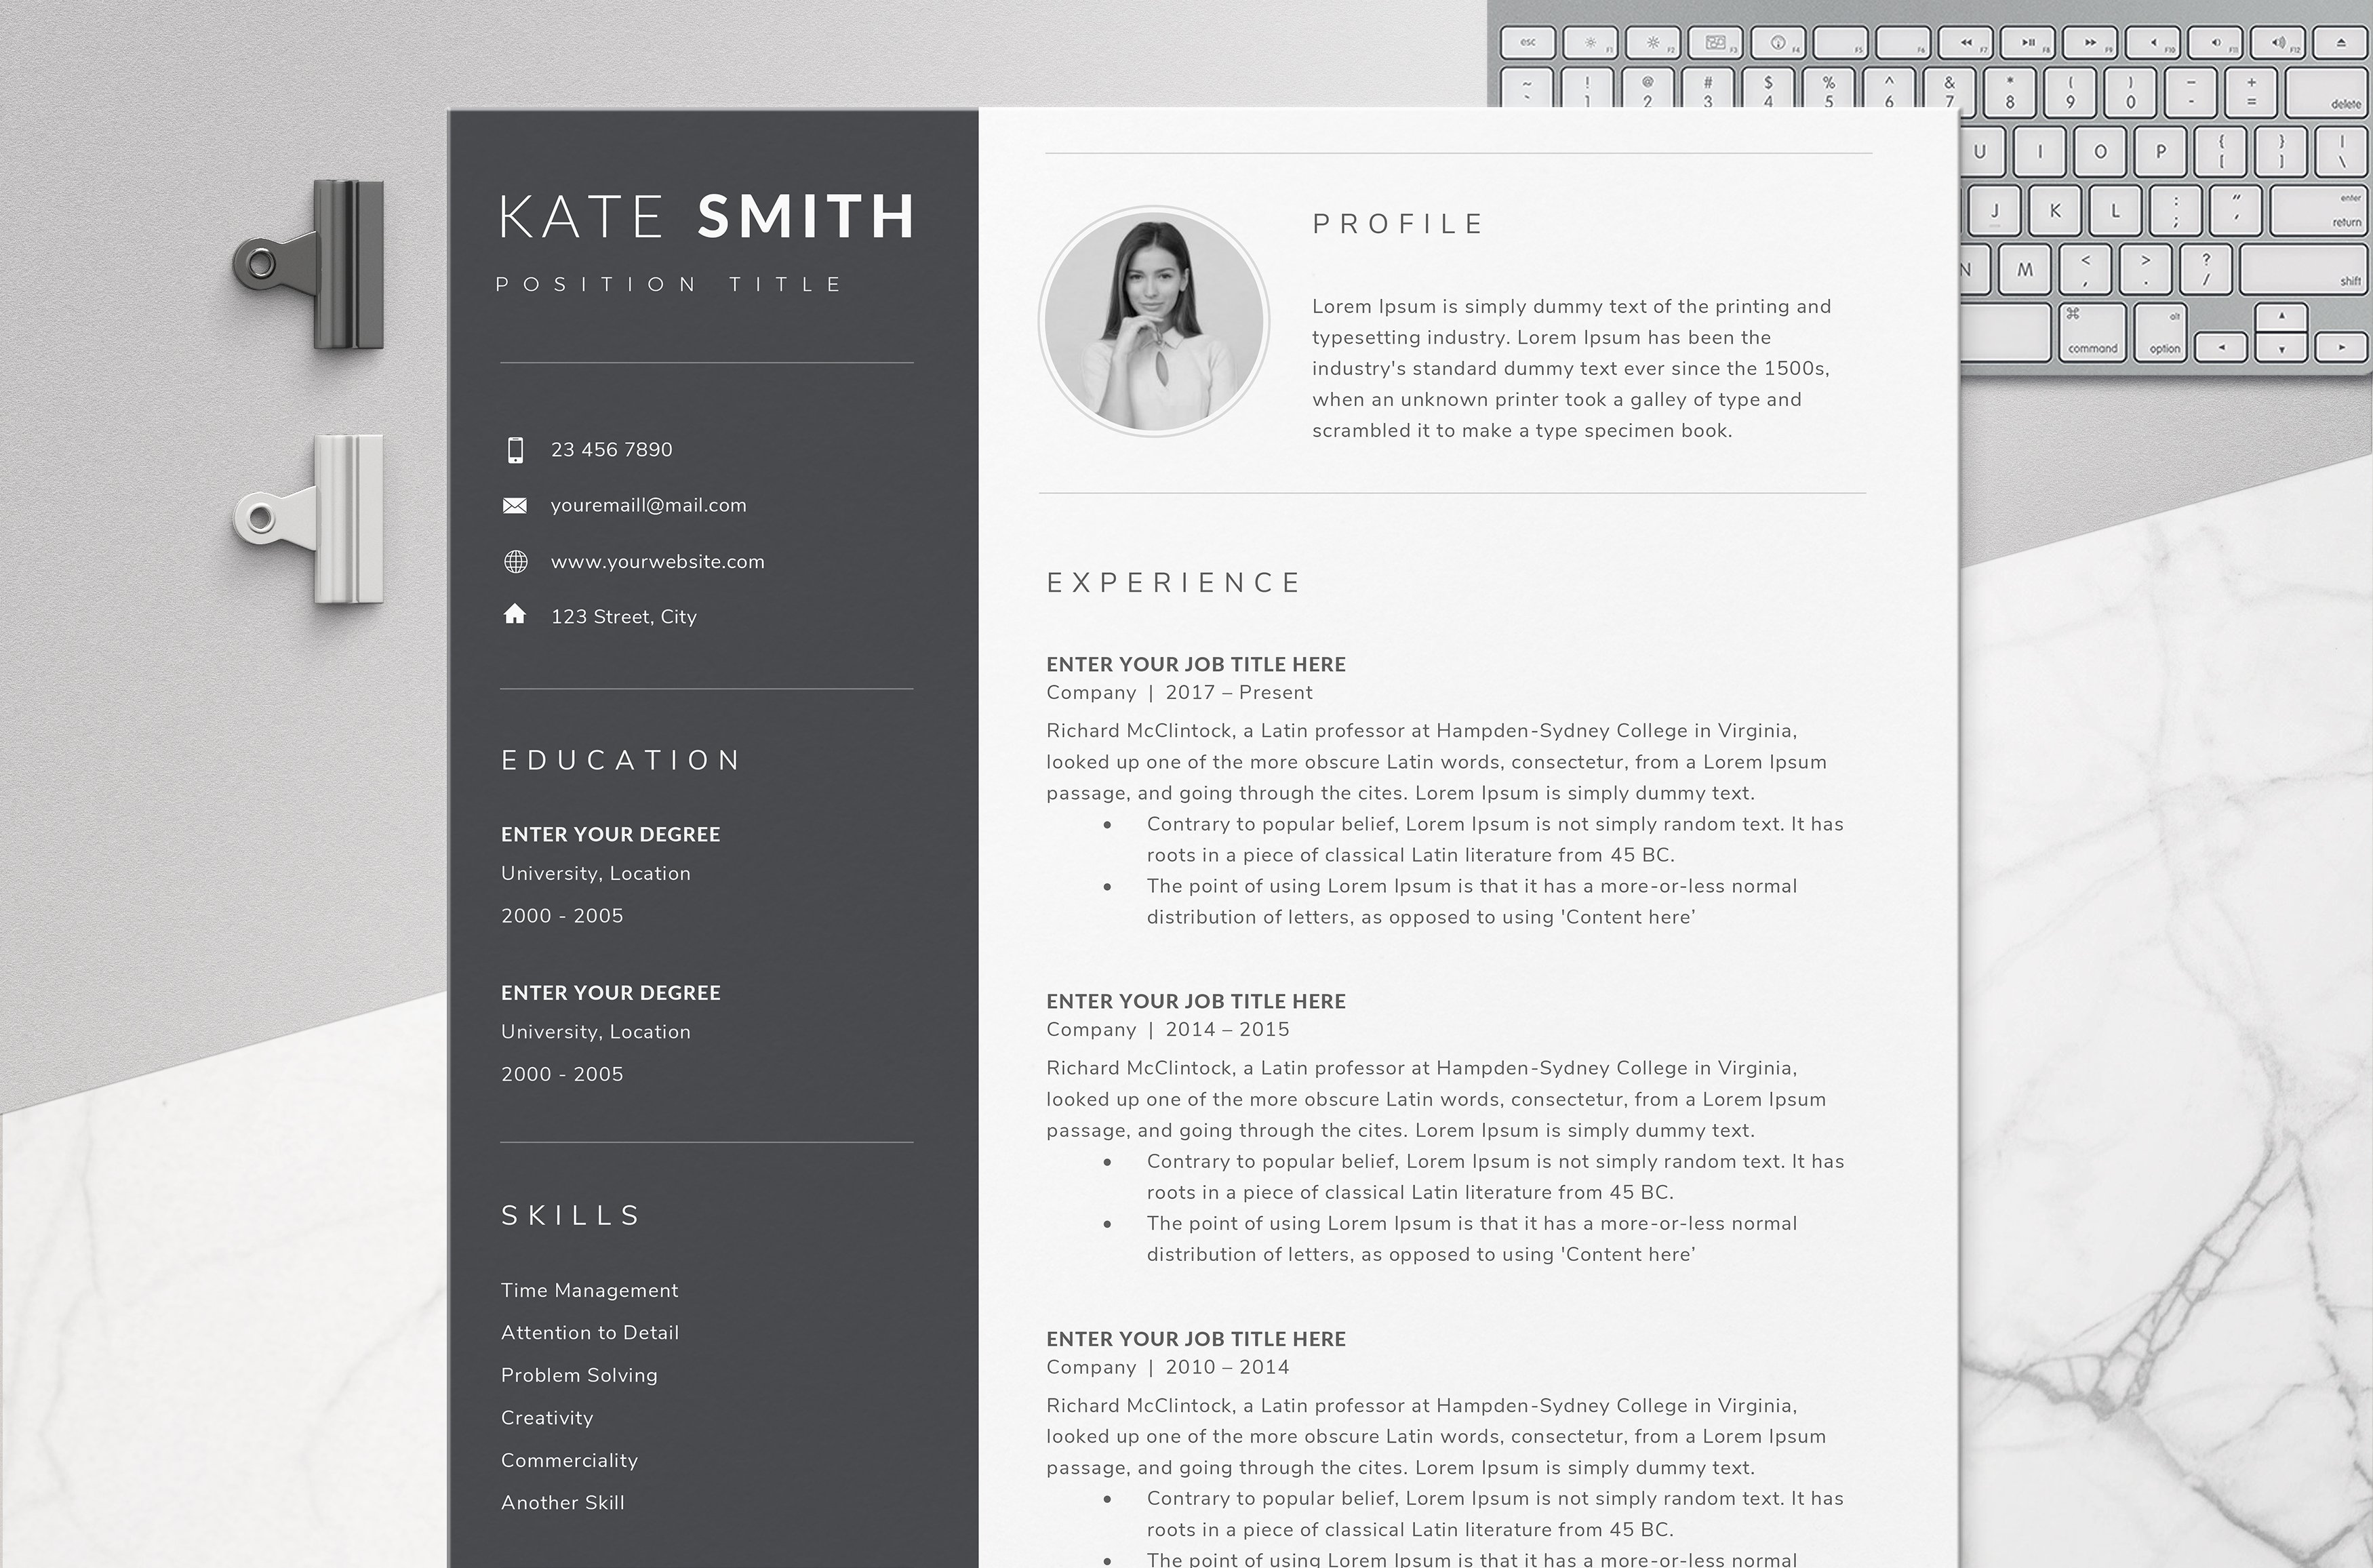 Resume Template / CV (One Page) cover image.